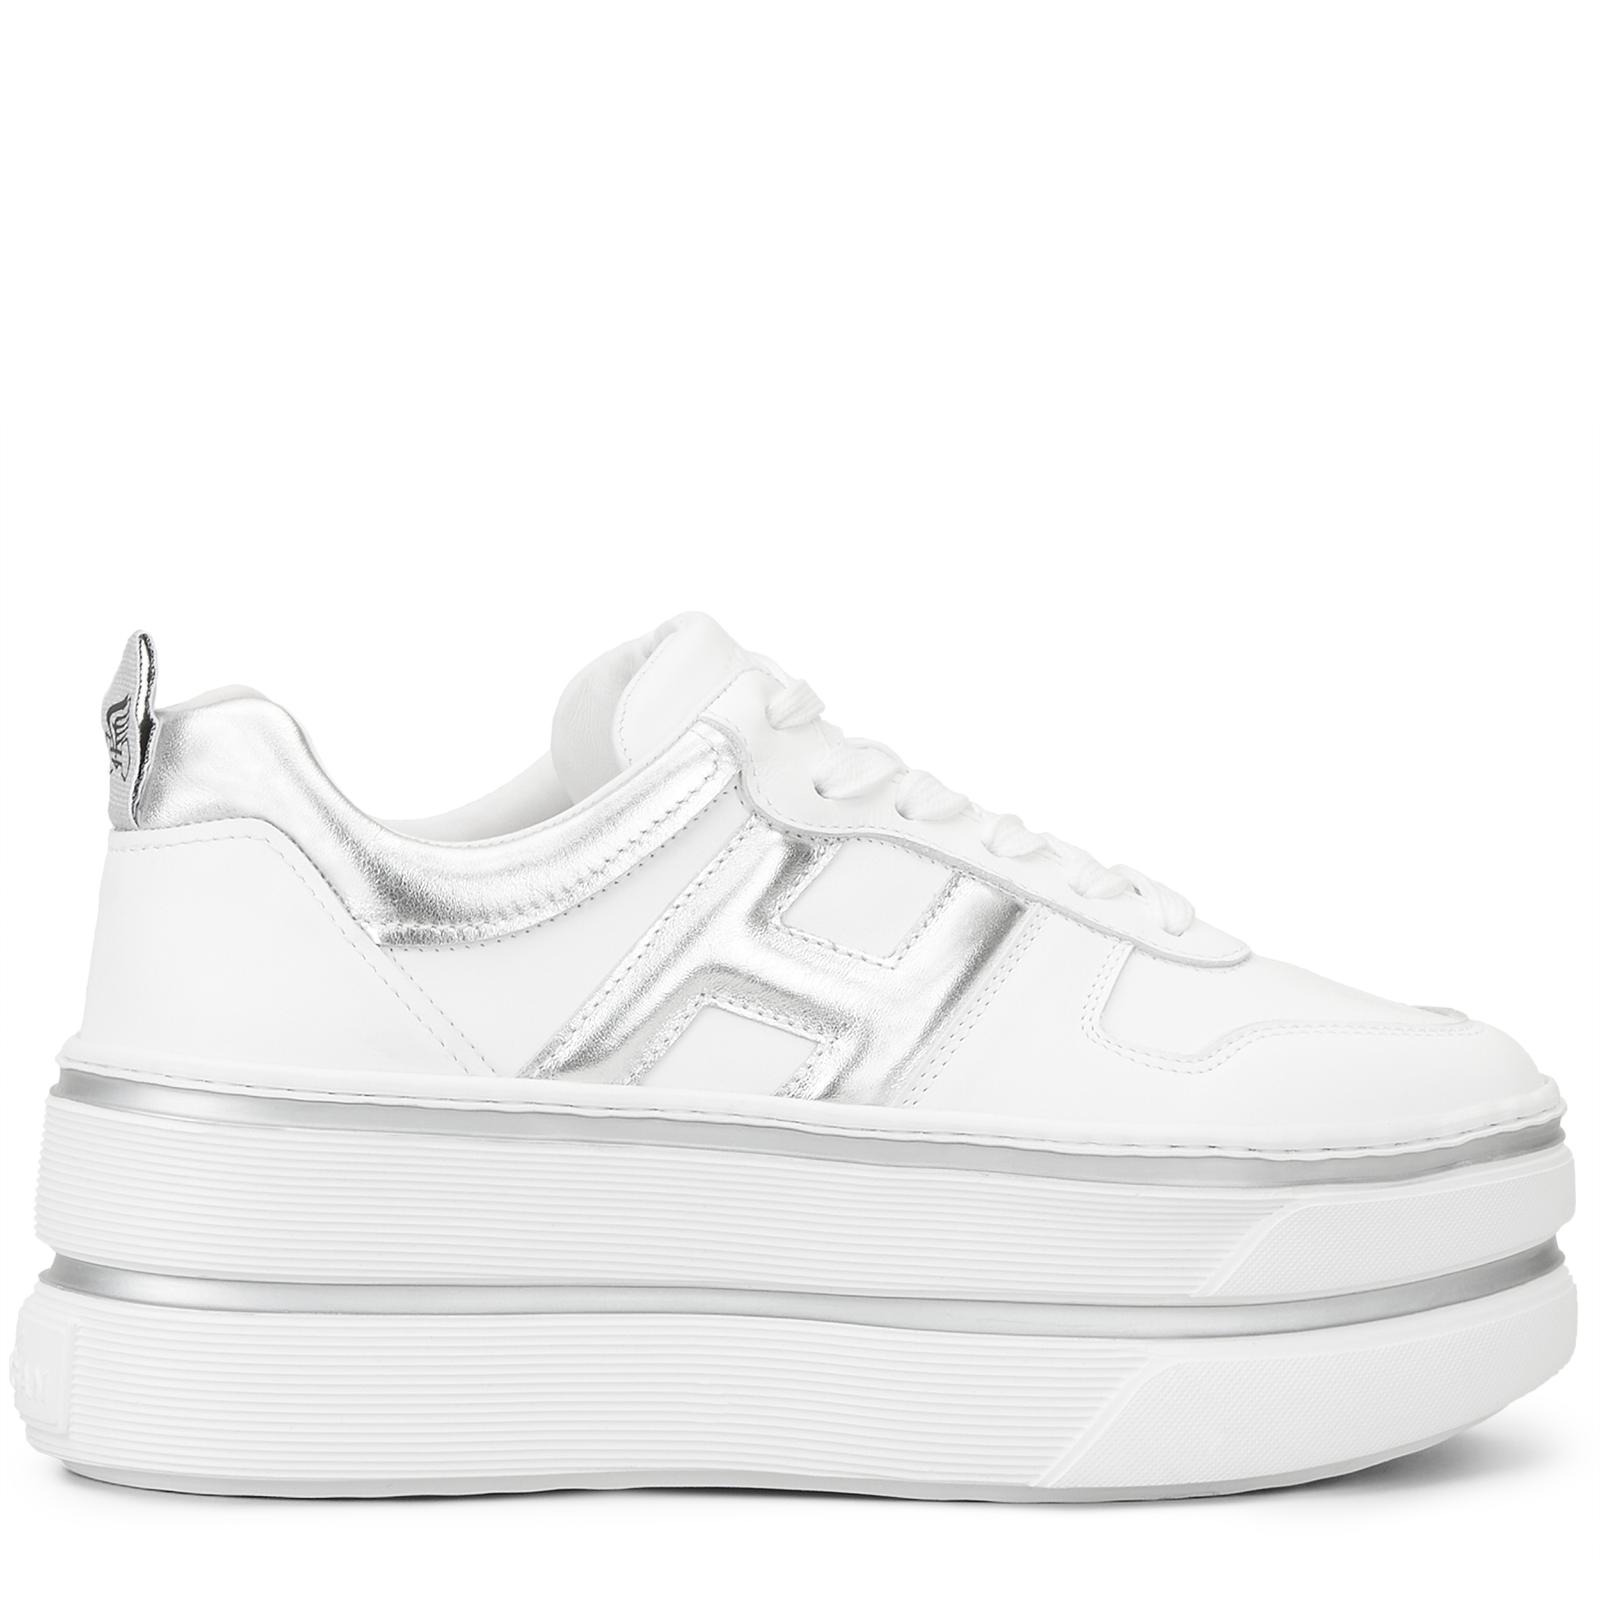 Hogan Leather Sneakers H449 in Silver,White (White) - Lyst